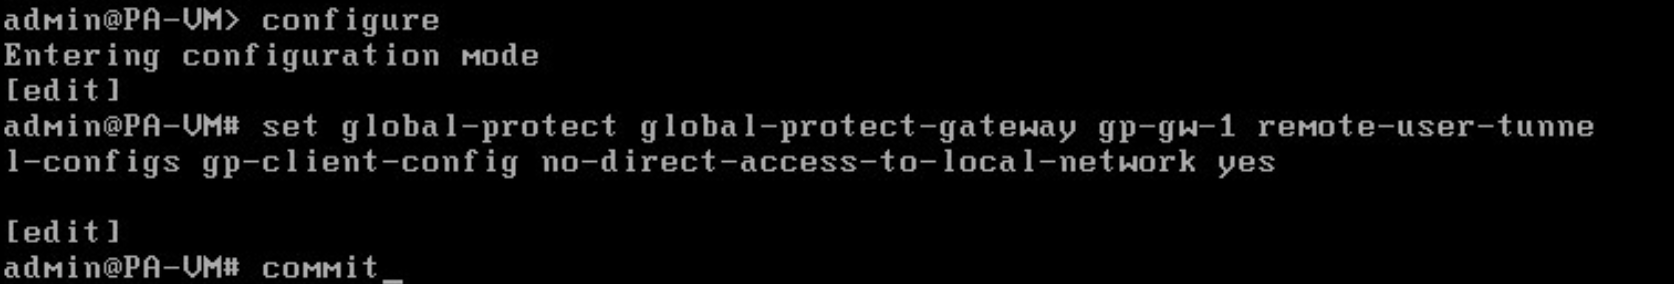 Screenshot displaying how to disable access to local resources in the command line interface.